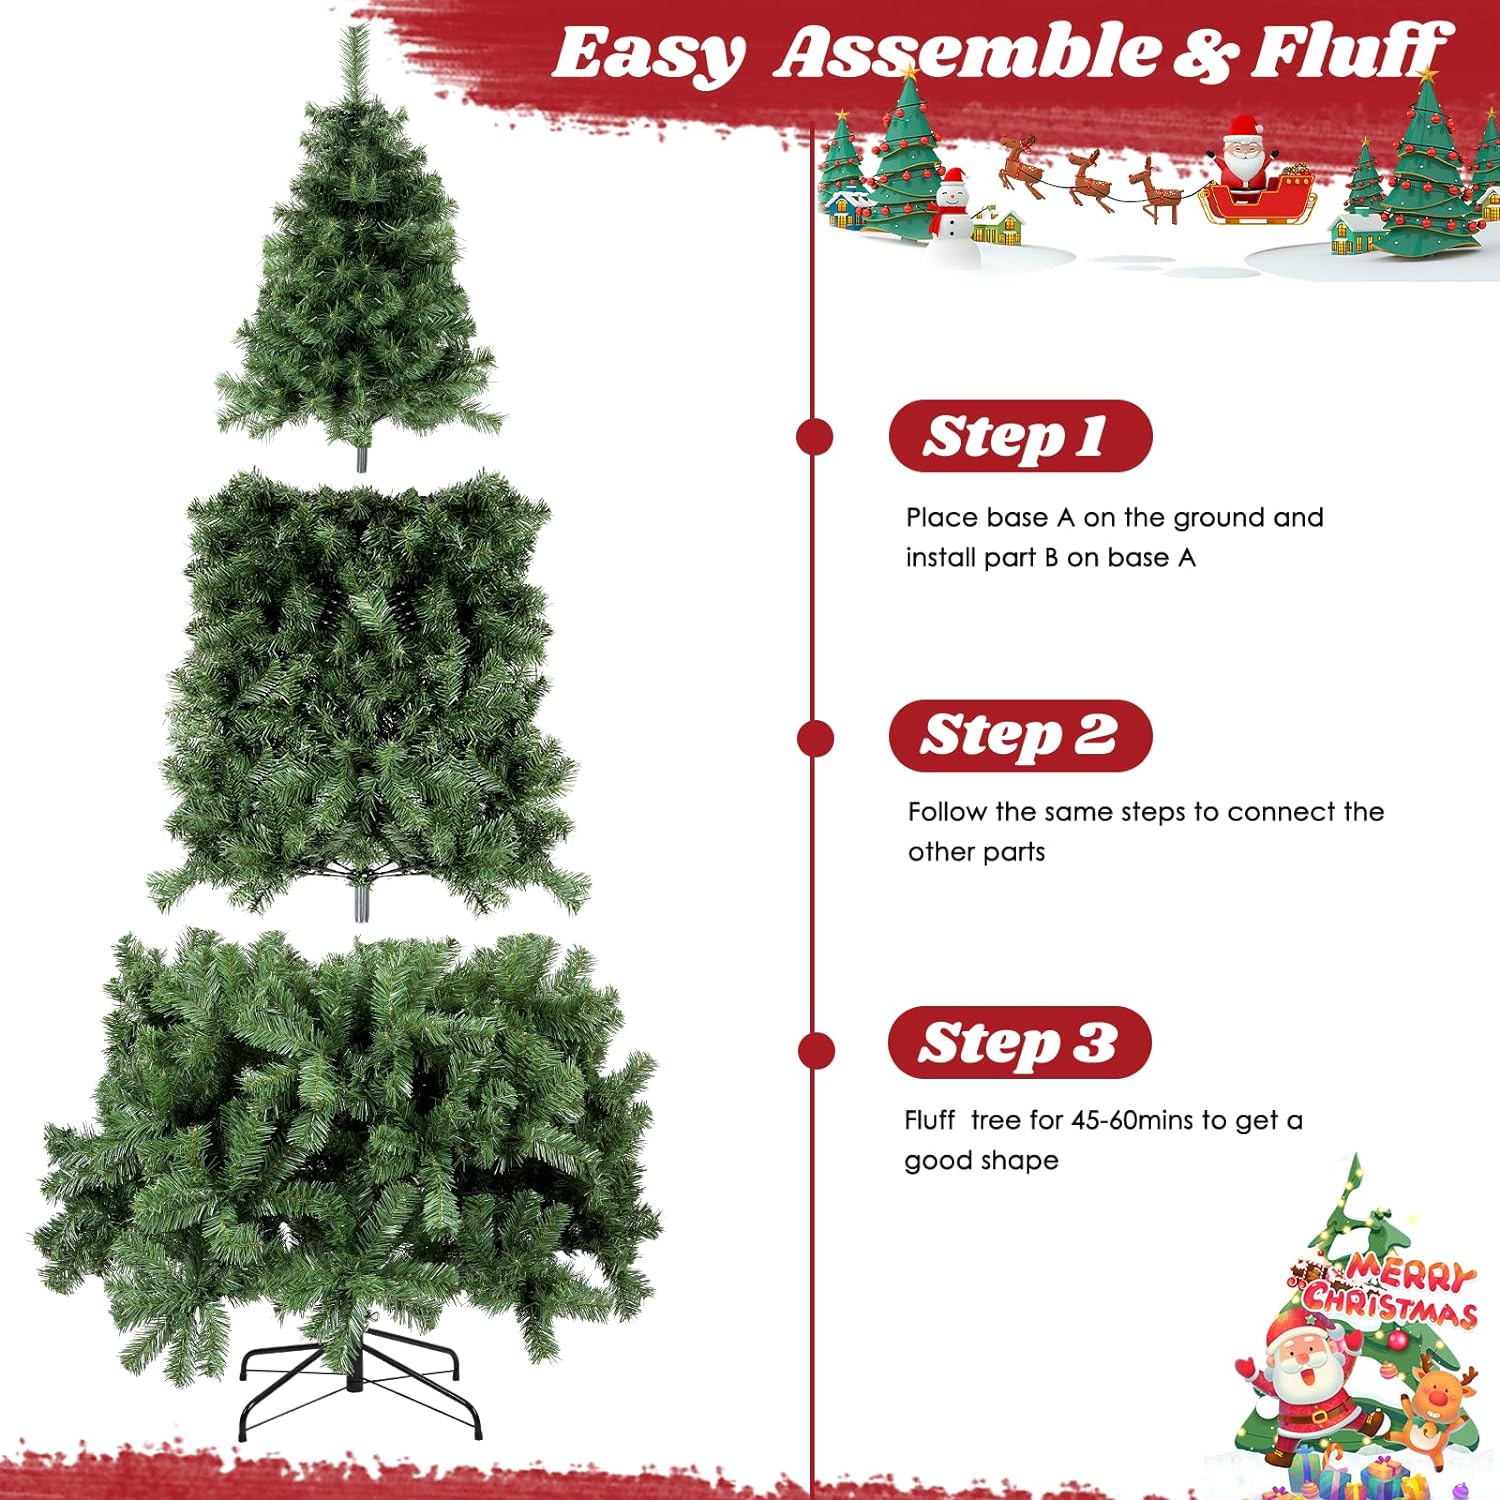 National Tree Company Artificial Full Christmas Tree, Green, Dunhill Fir, Includes Stand, 7.5 Feet(Delivery in 2-3 days)